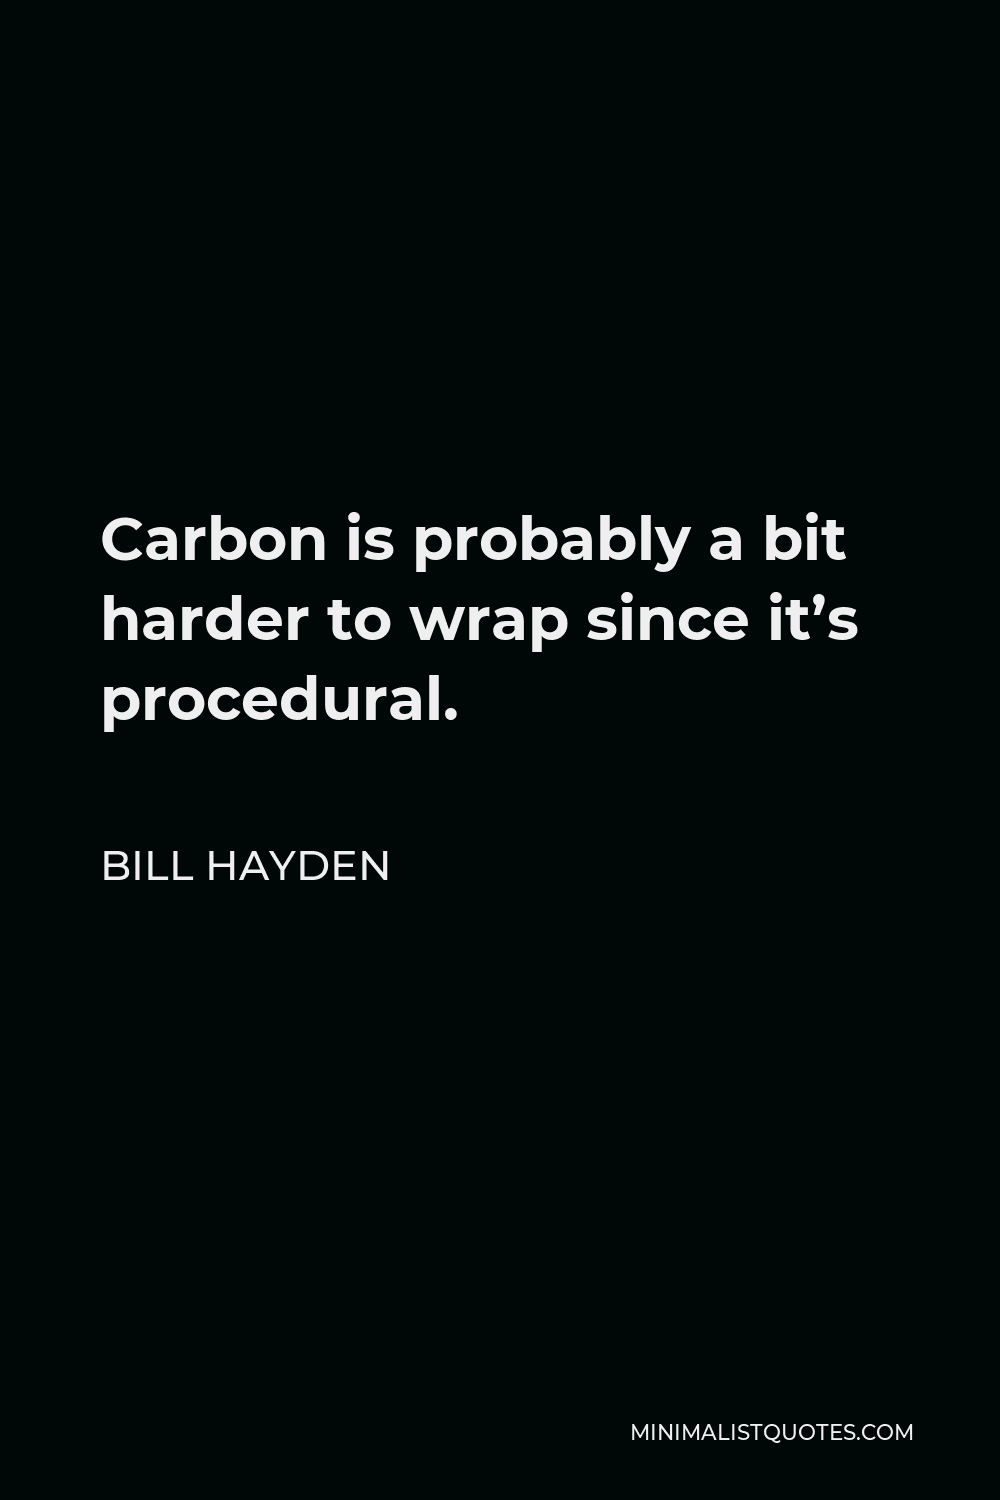 Bill Hayden Quote - Carbon is probably a bit harder to wrap since it’s procedural.